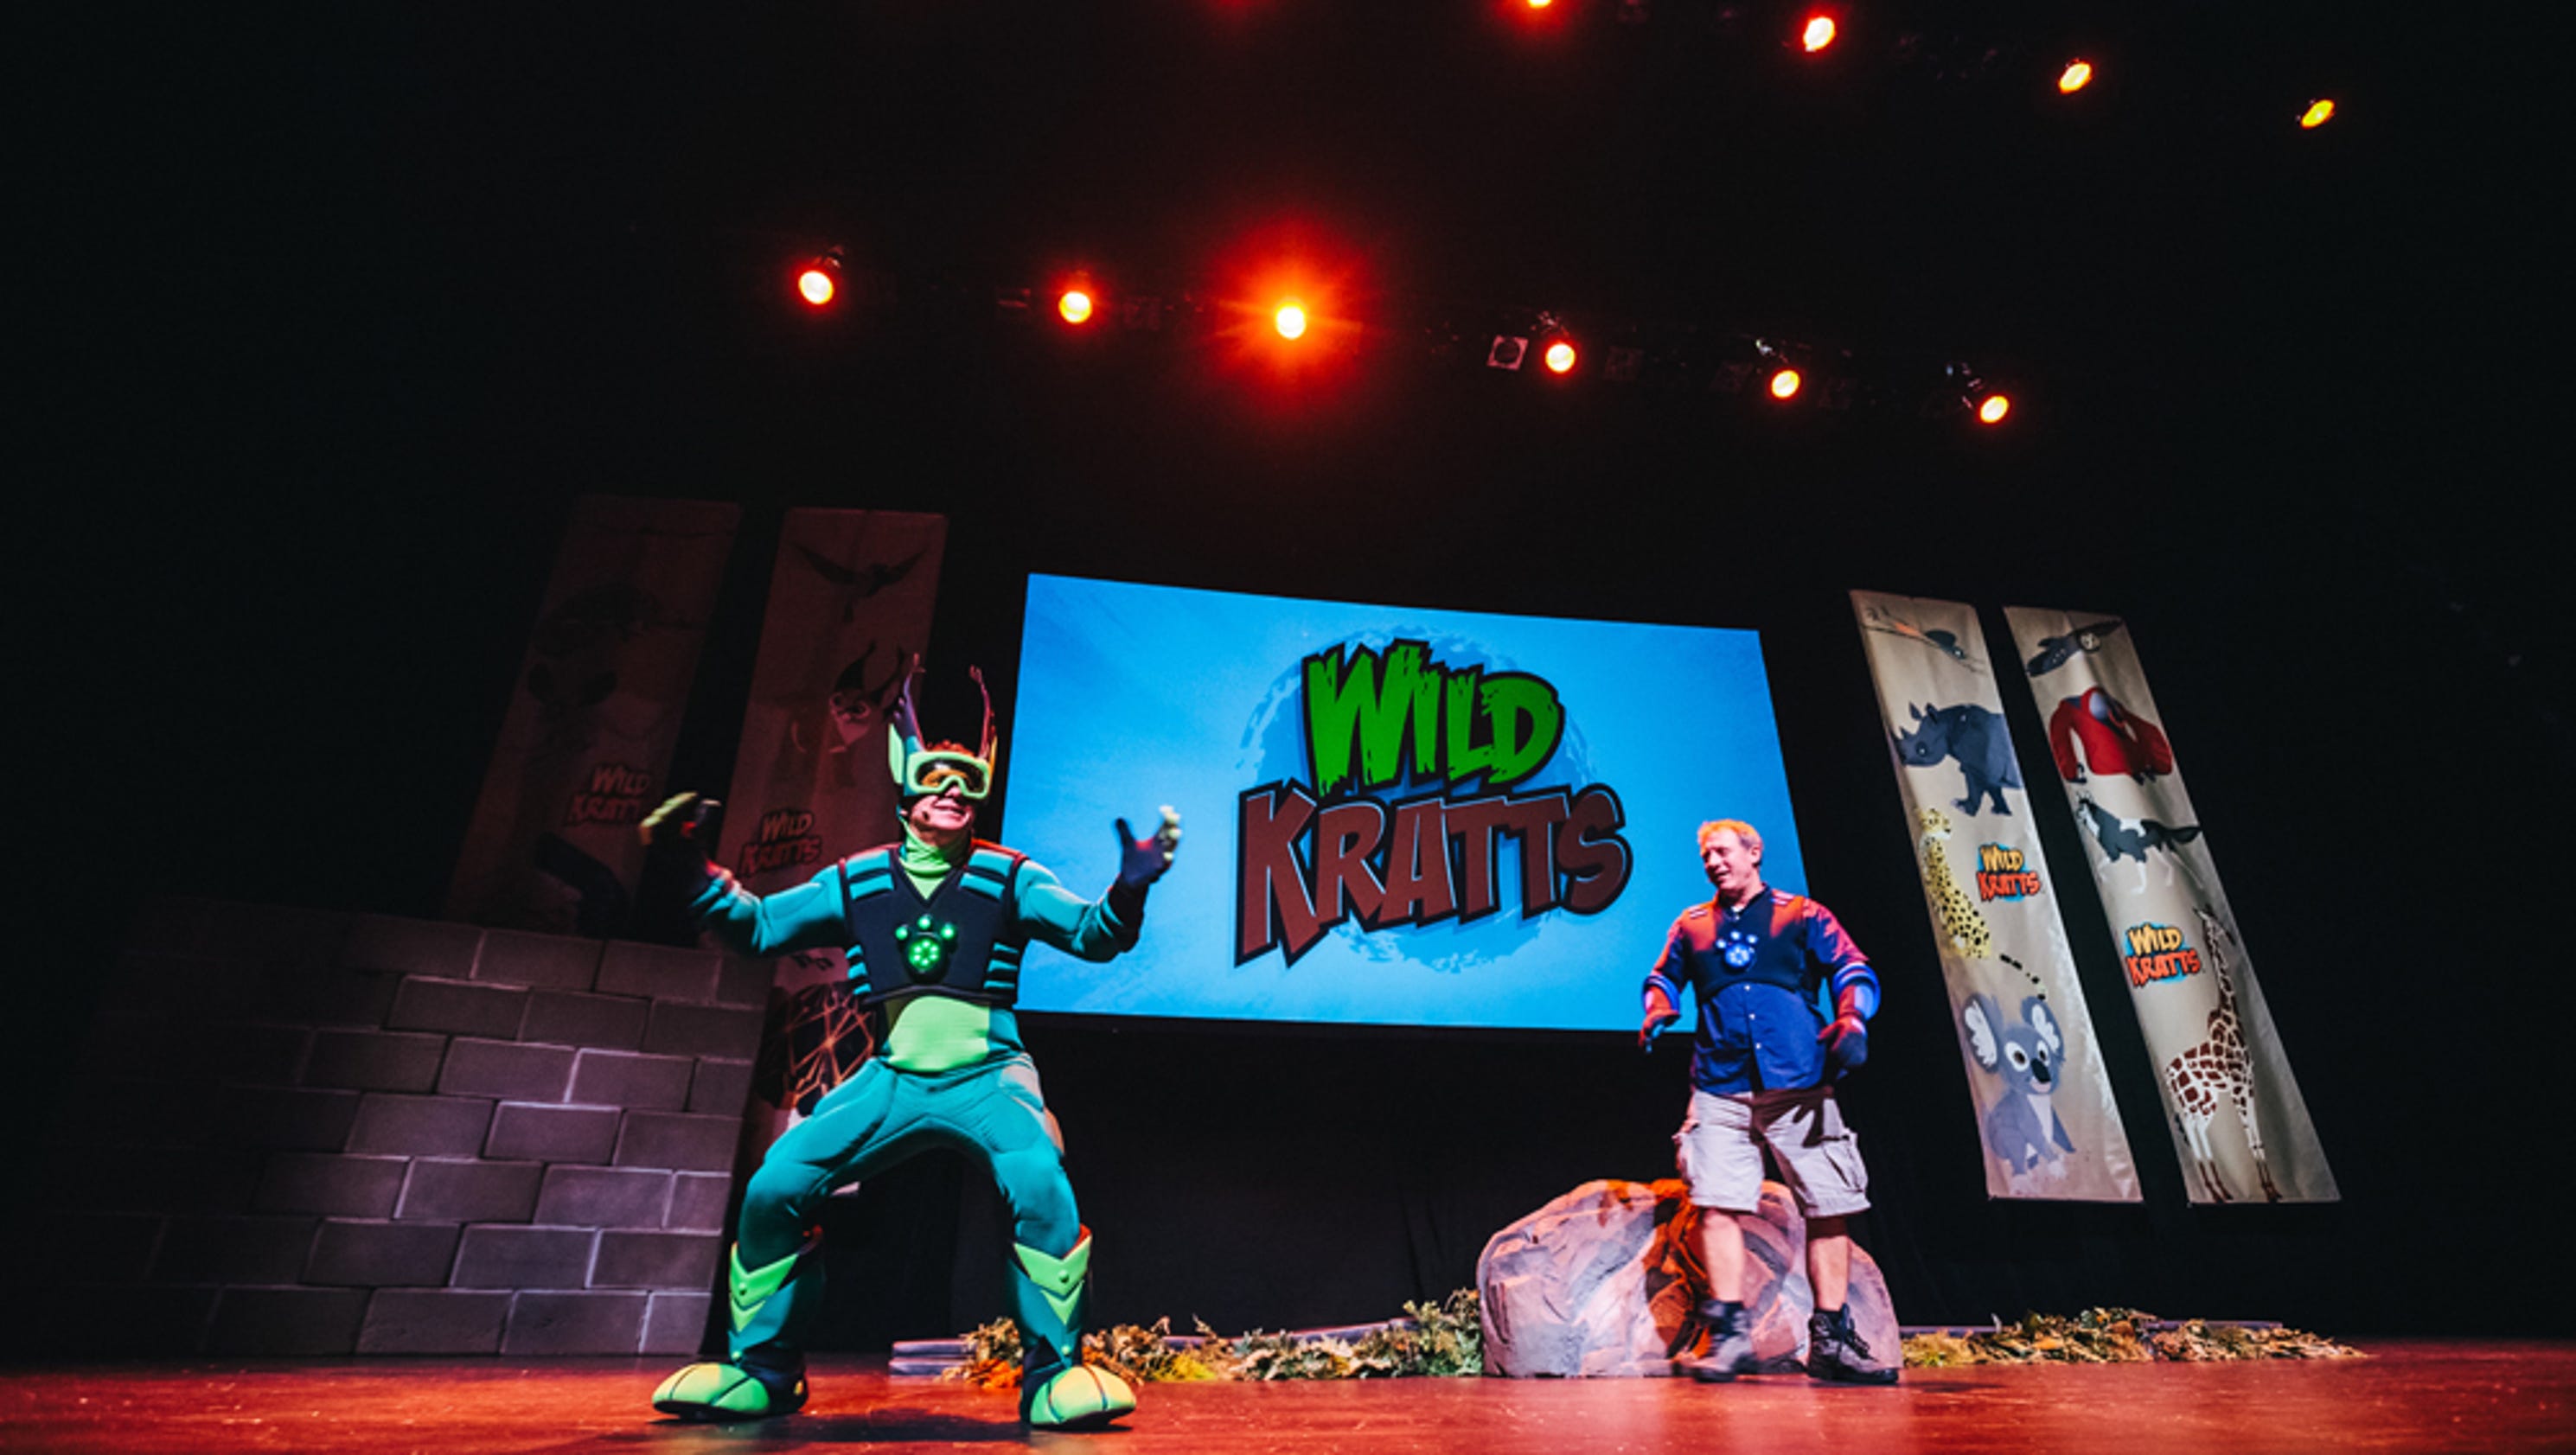 Wild Kratts Live! brings kids' show heroes, crazy creatures to